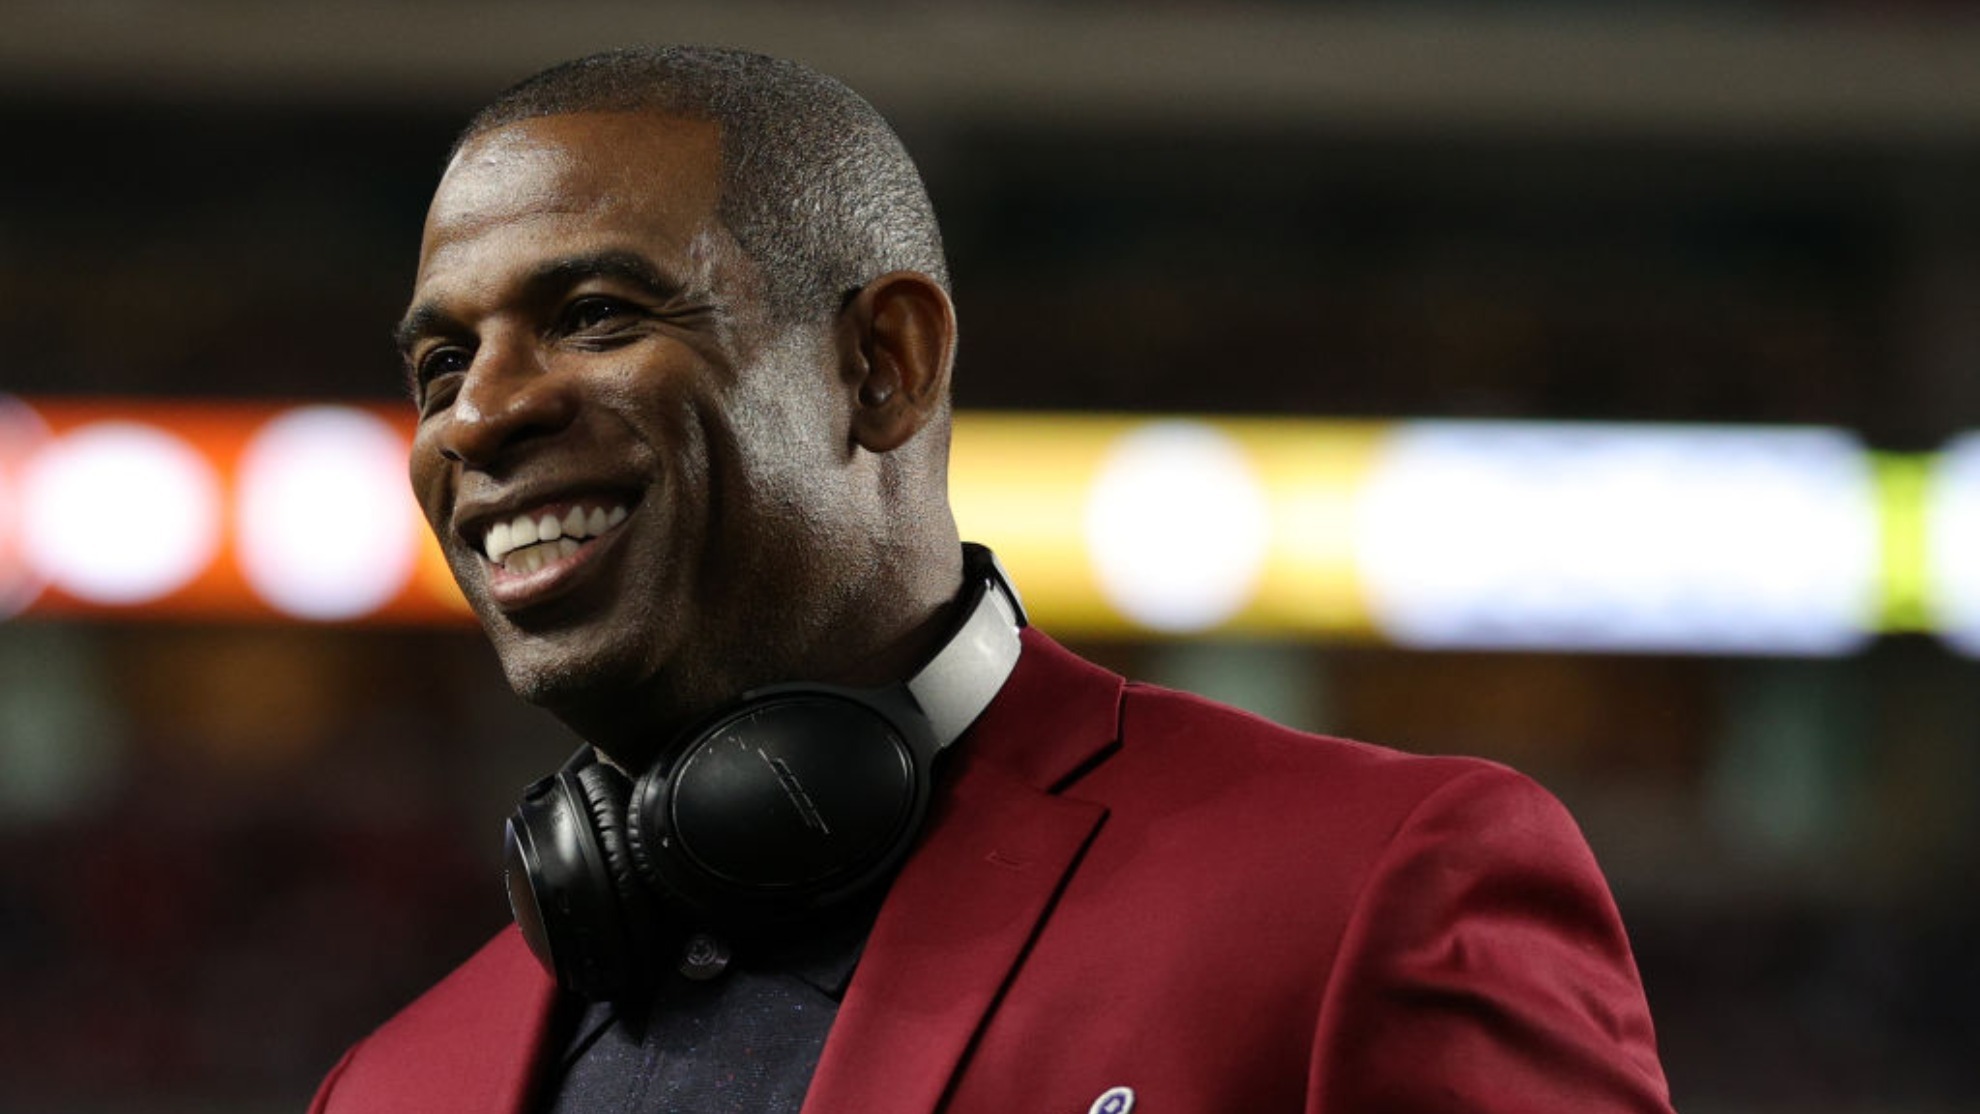 Deion Sanders of the NLF 100 All-Time Team is honored on the field prior to Super Bowl LIV in Miami.